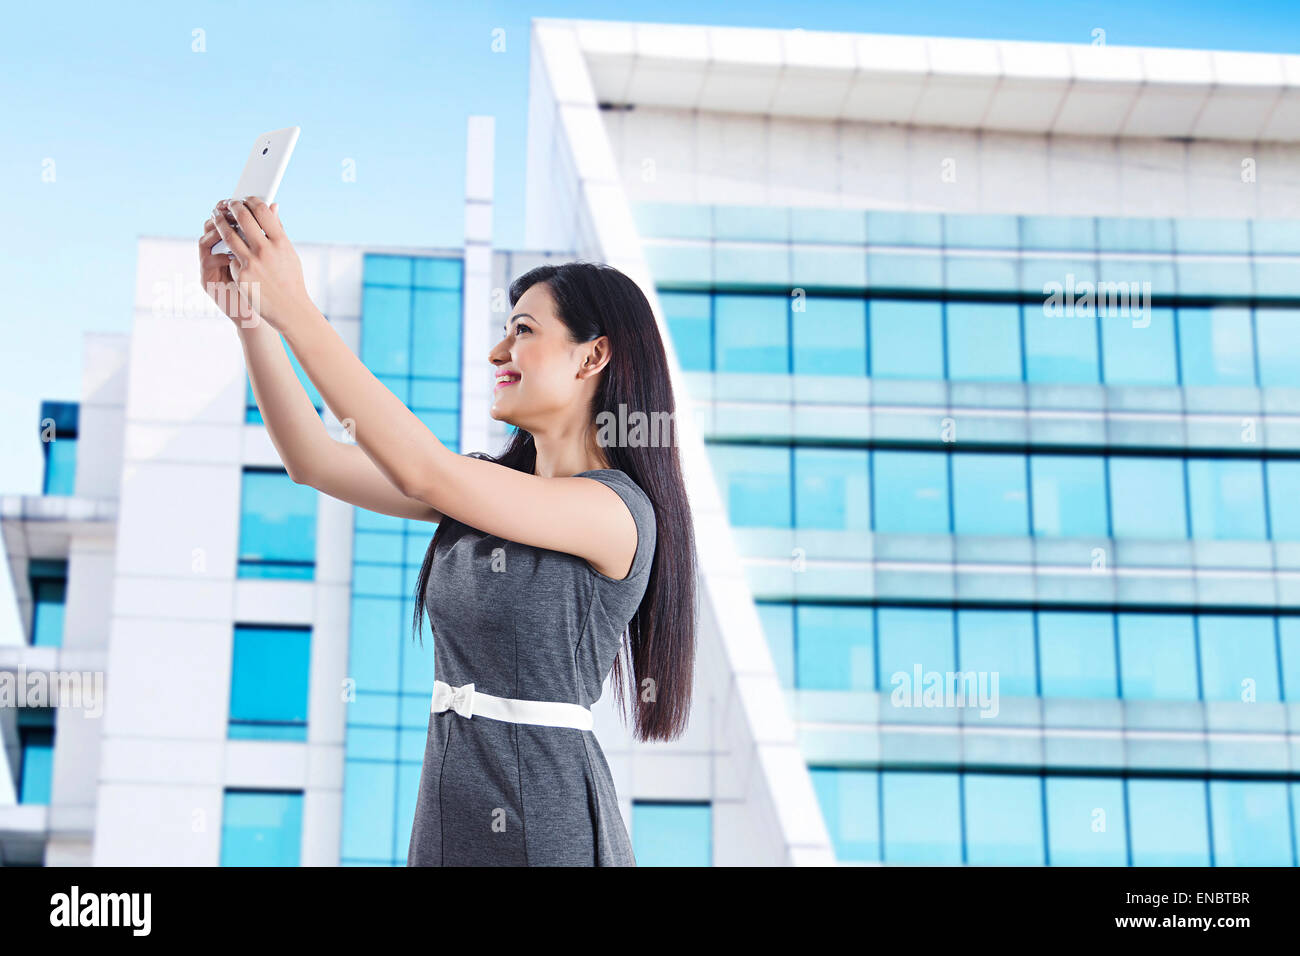 1 indian Business woman phone Clicking Selfie Stock Photo - Alamy